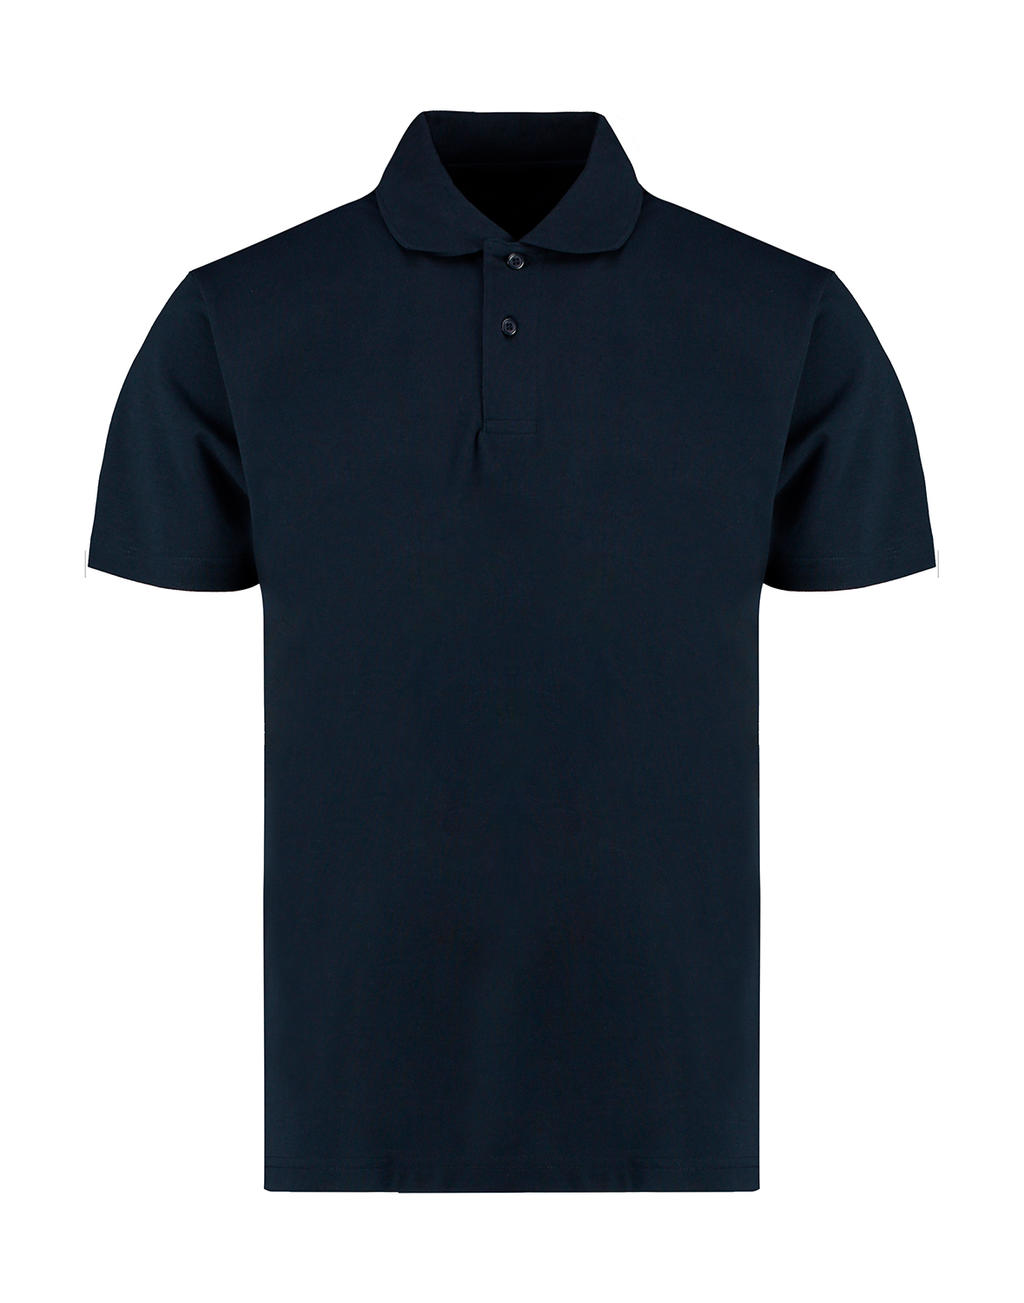  Mens Regular Fit Workforce Polo in Farbe Navy